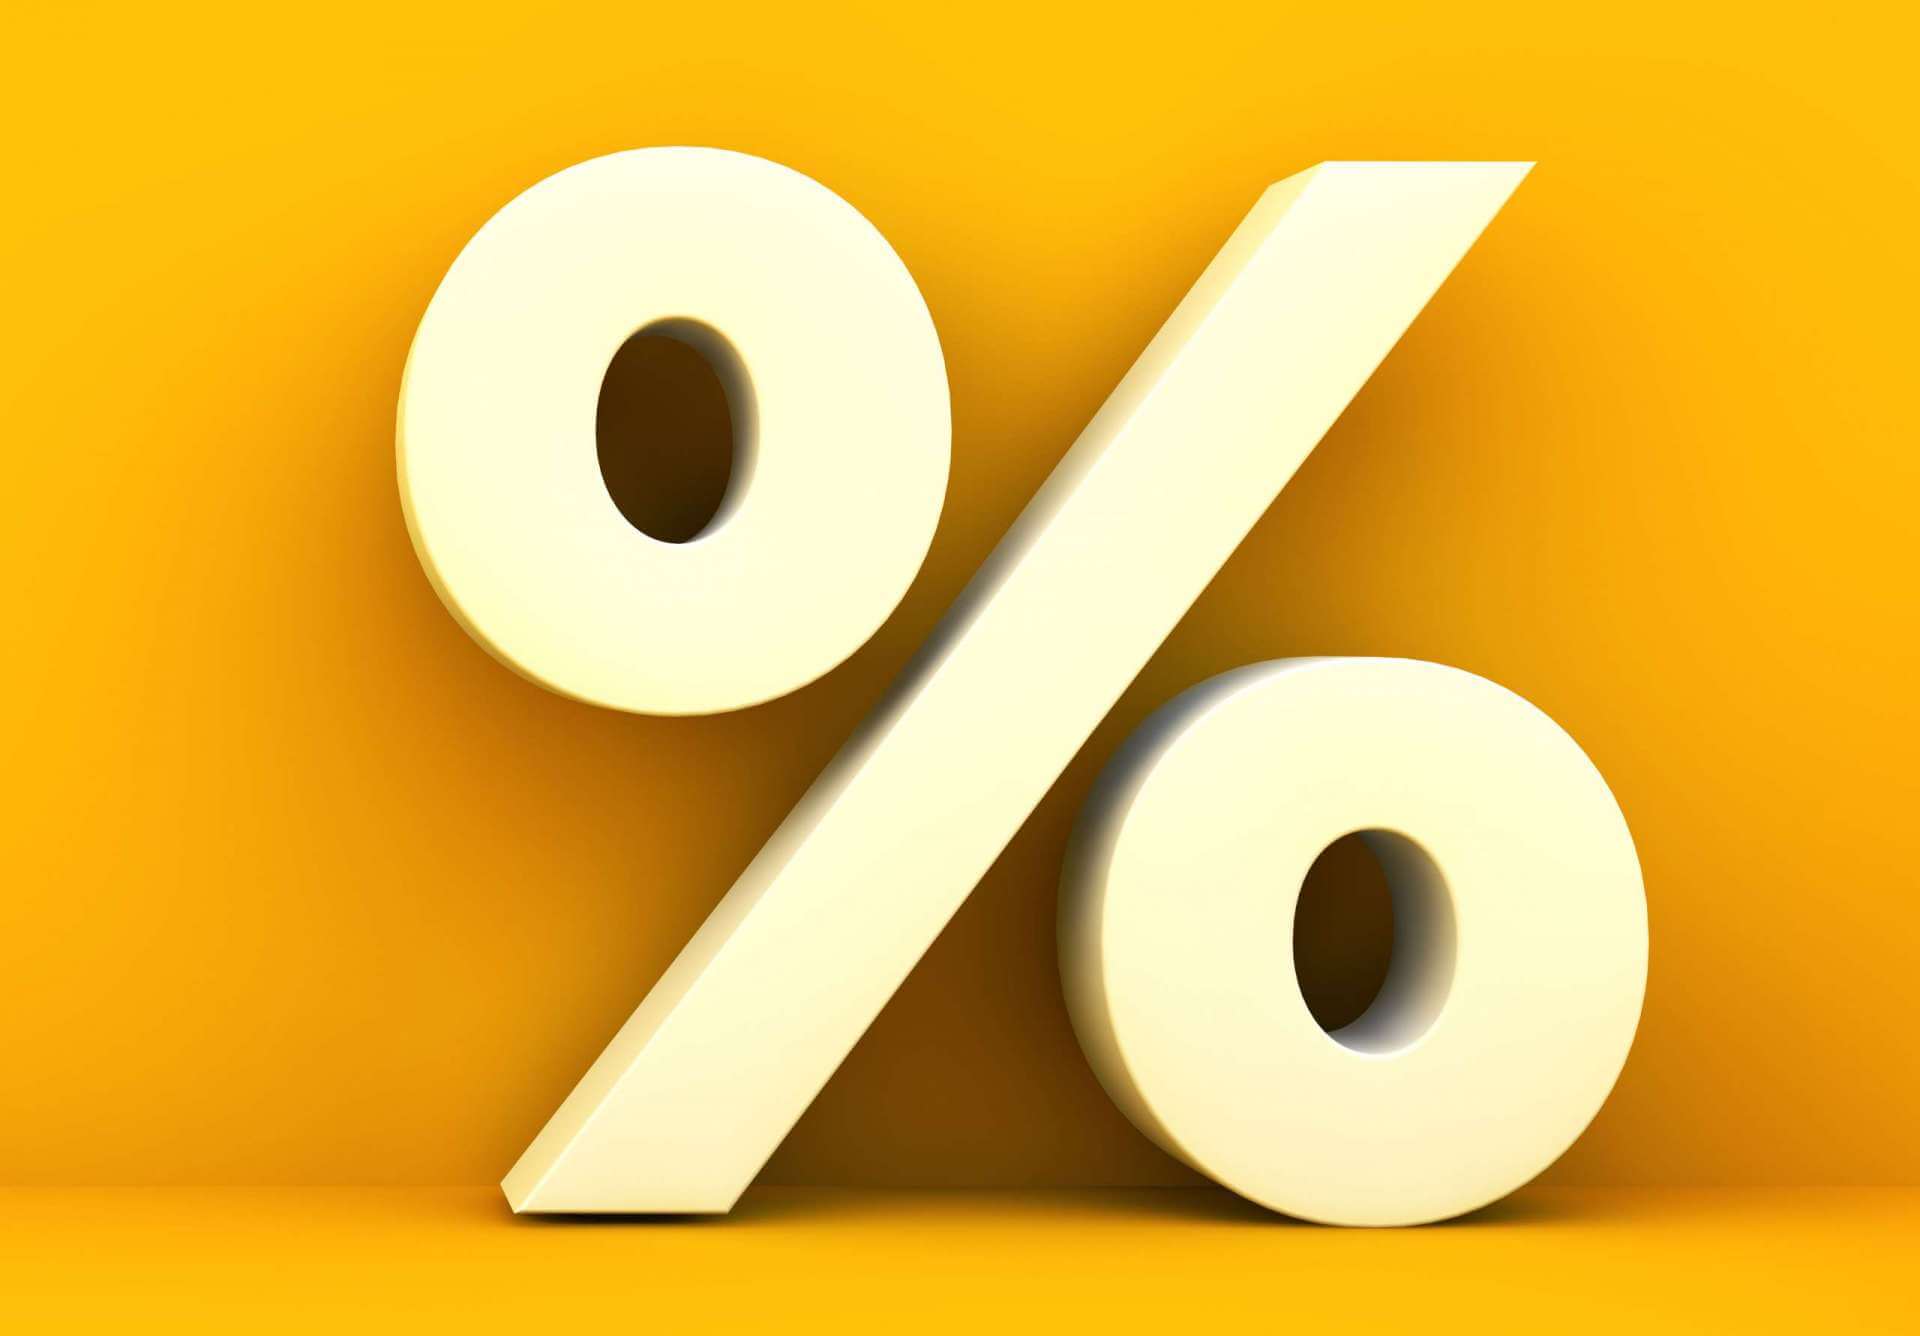 The Shocking Truth: You Won't Believe What 2% Of 10 Equals!